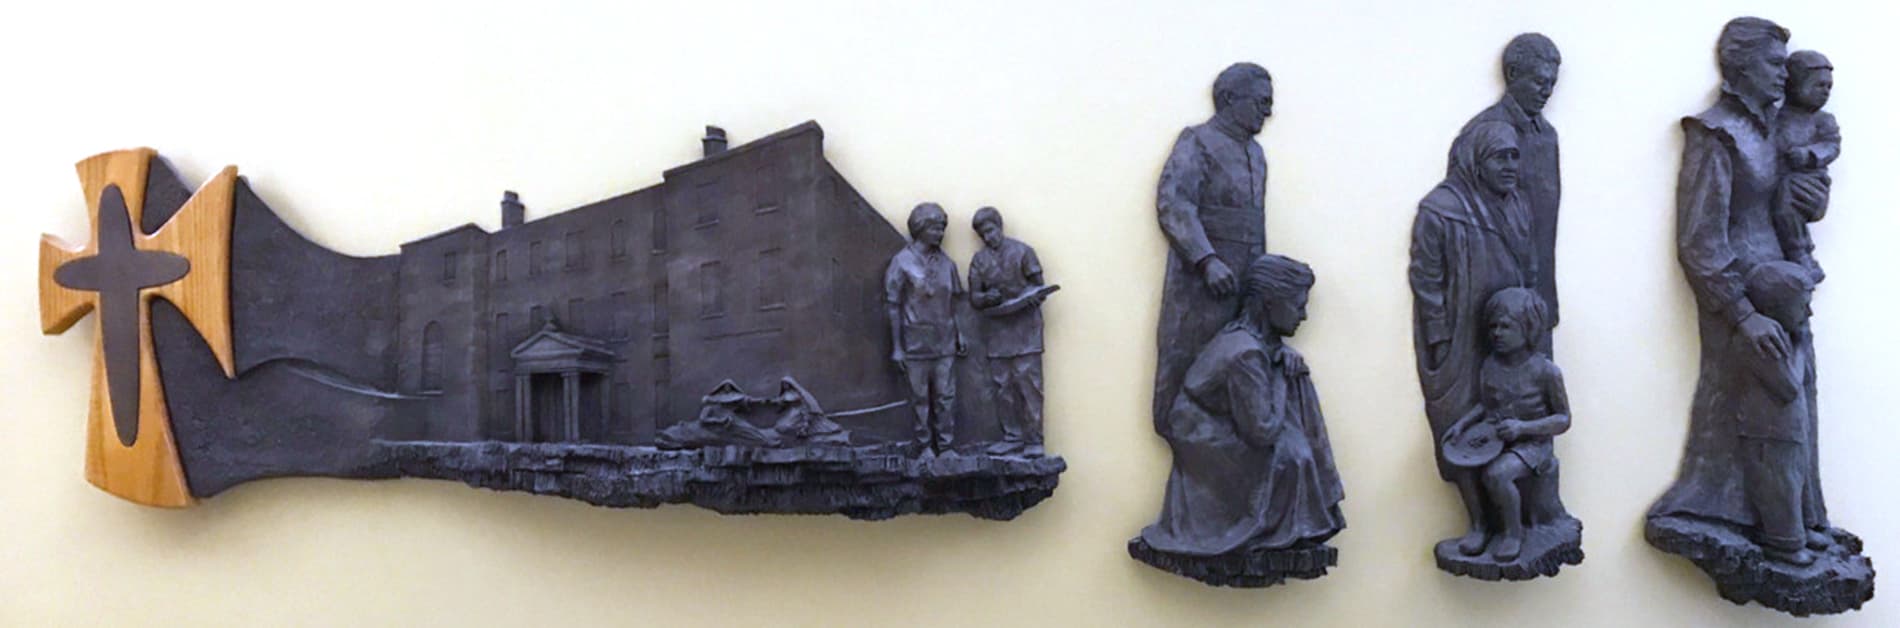 A sculptured wall-hanging featuring the House of Mercy in Dublin, Catherine McAuley, and people helping children